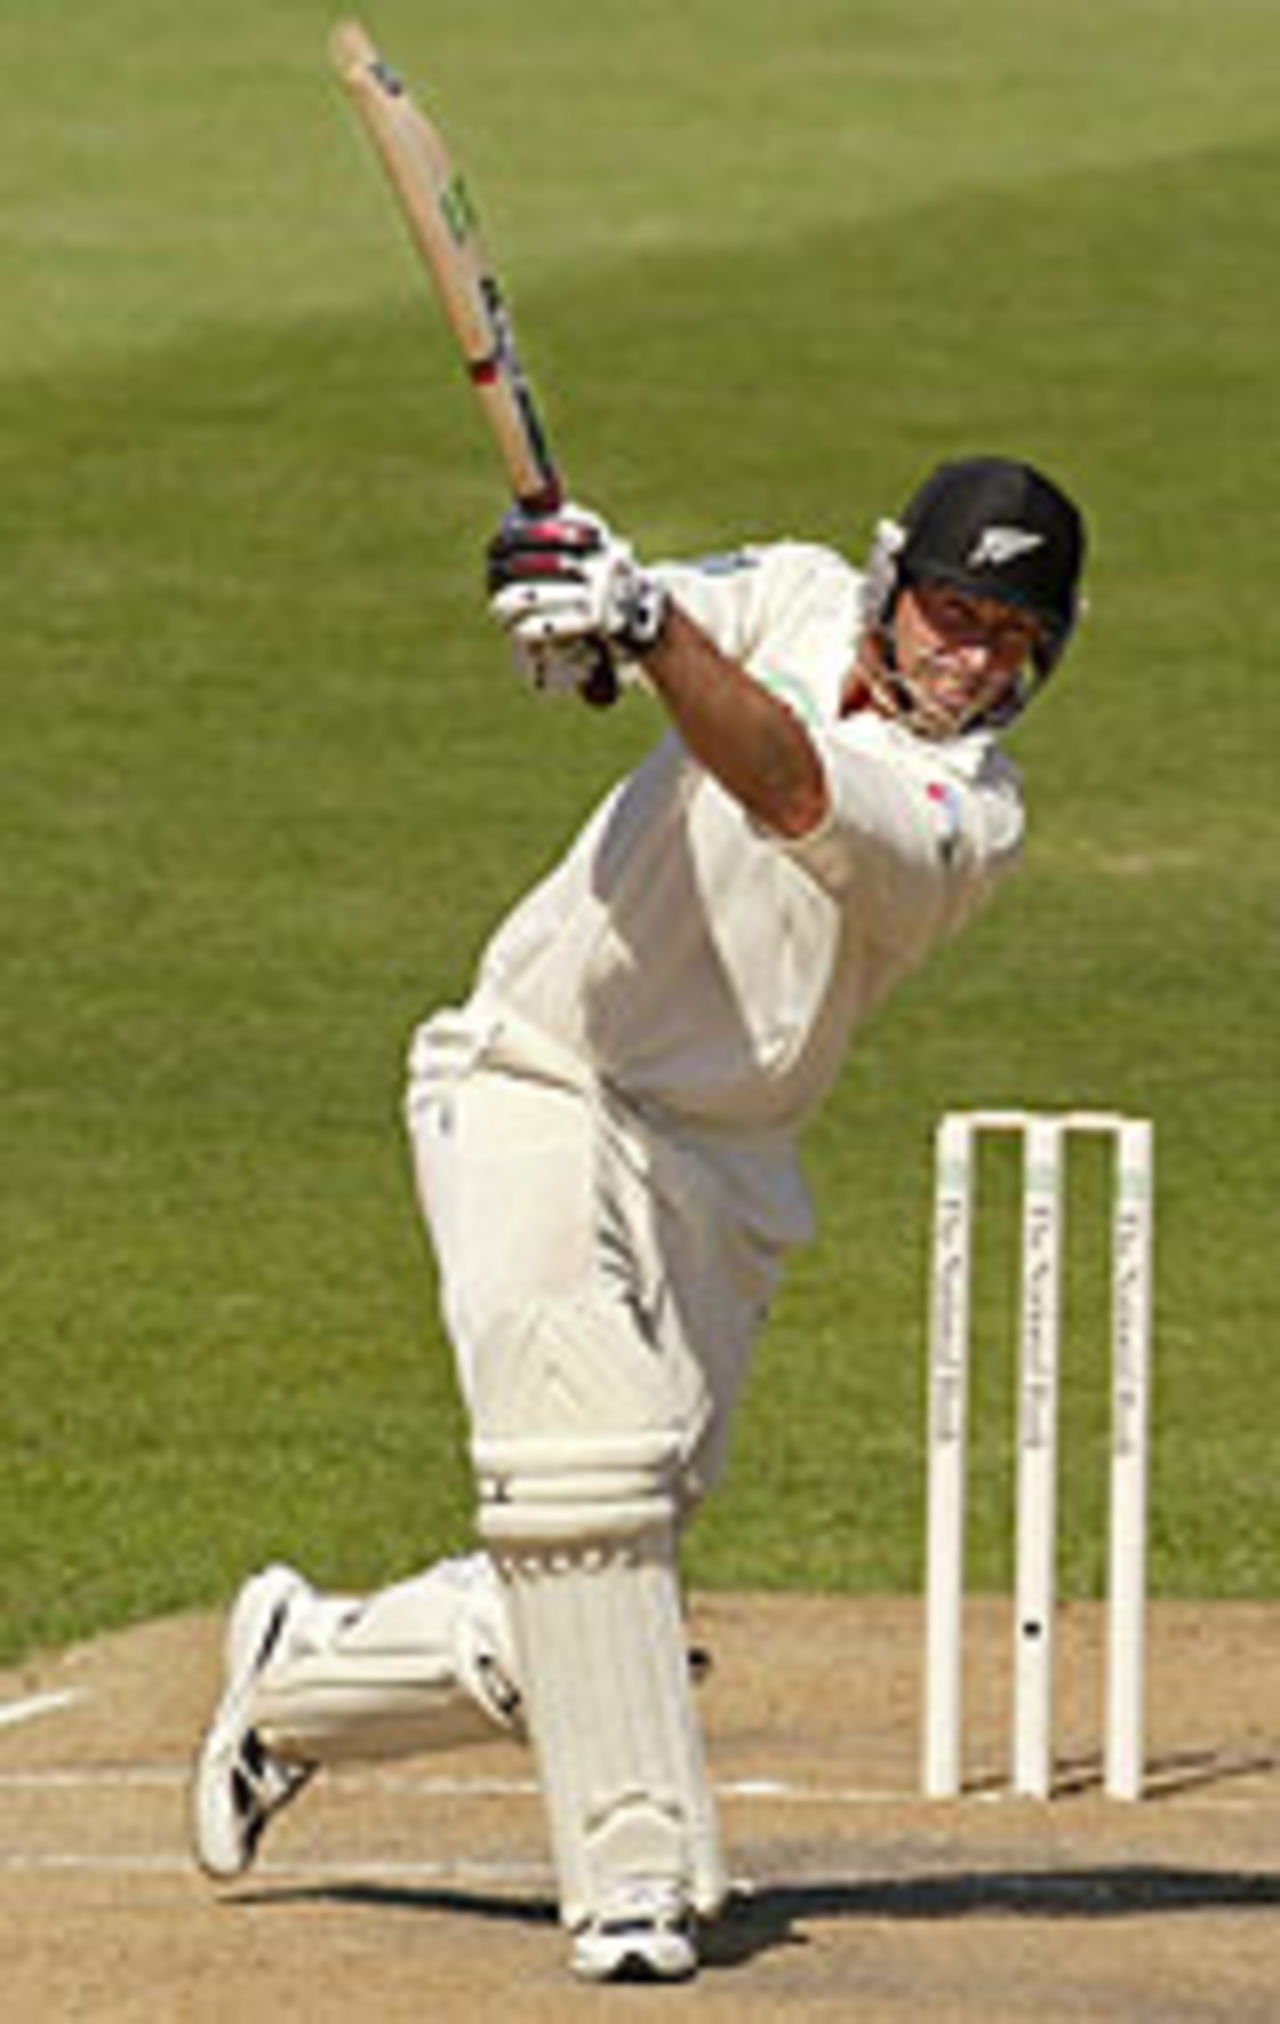 Stephen Feming hits out, New Zealand v South Africa, 2nd Test, Auckland, 5th day, March 22, 2004